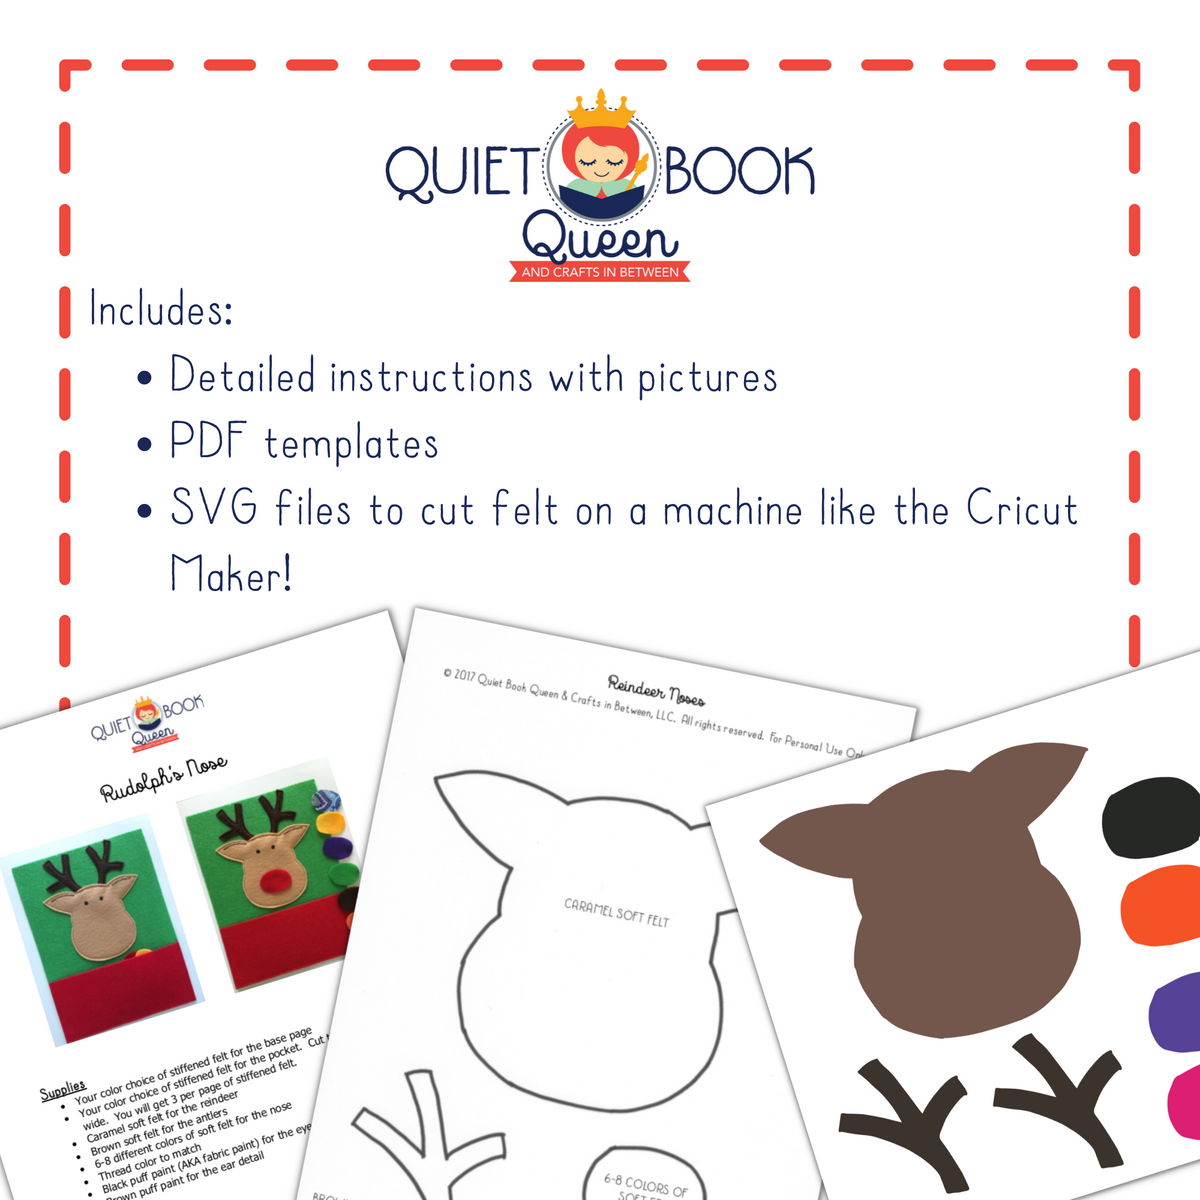 Christmas Set 2 Quiet Book Template and Instructions Bundle